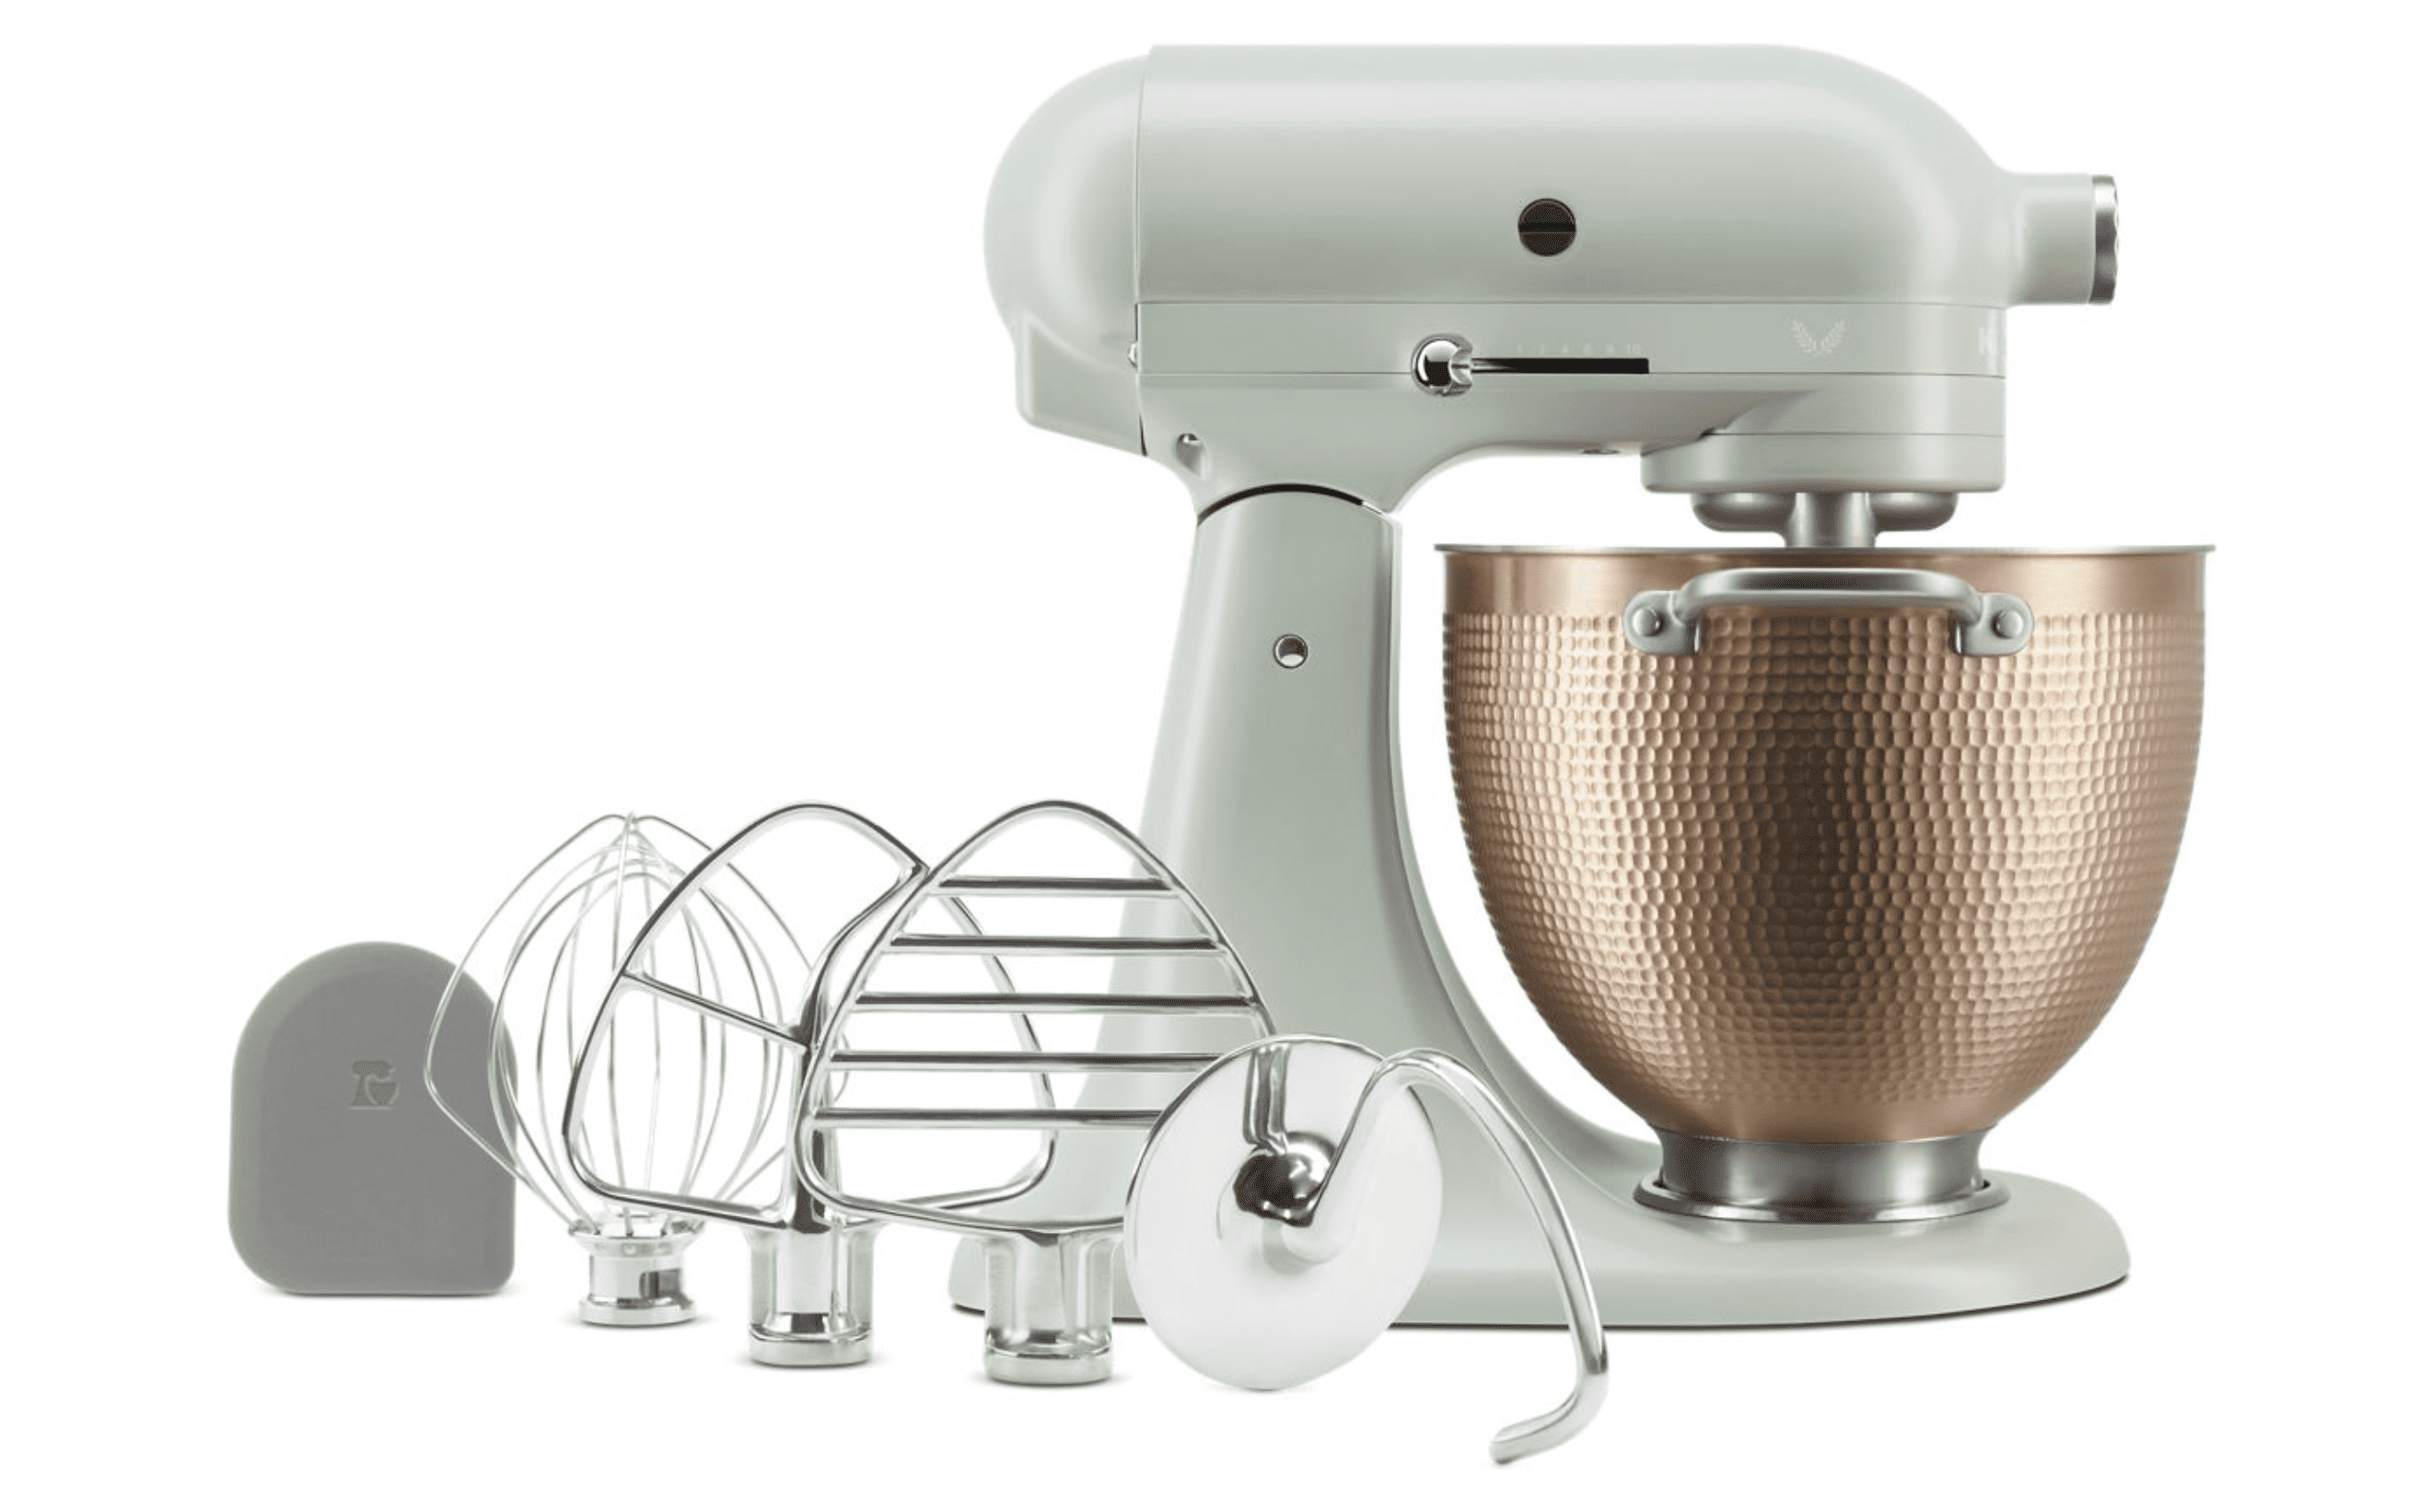 https://cdn.apartmenttherapy.info/image/upload/v1662648590/gen-workflow/product-database/KitchenAid%20Artisan%20Design%20Series%20Blossom%20Stand%20Mixer.png